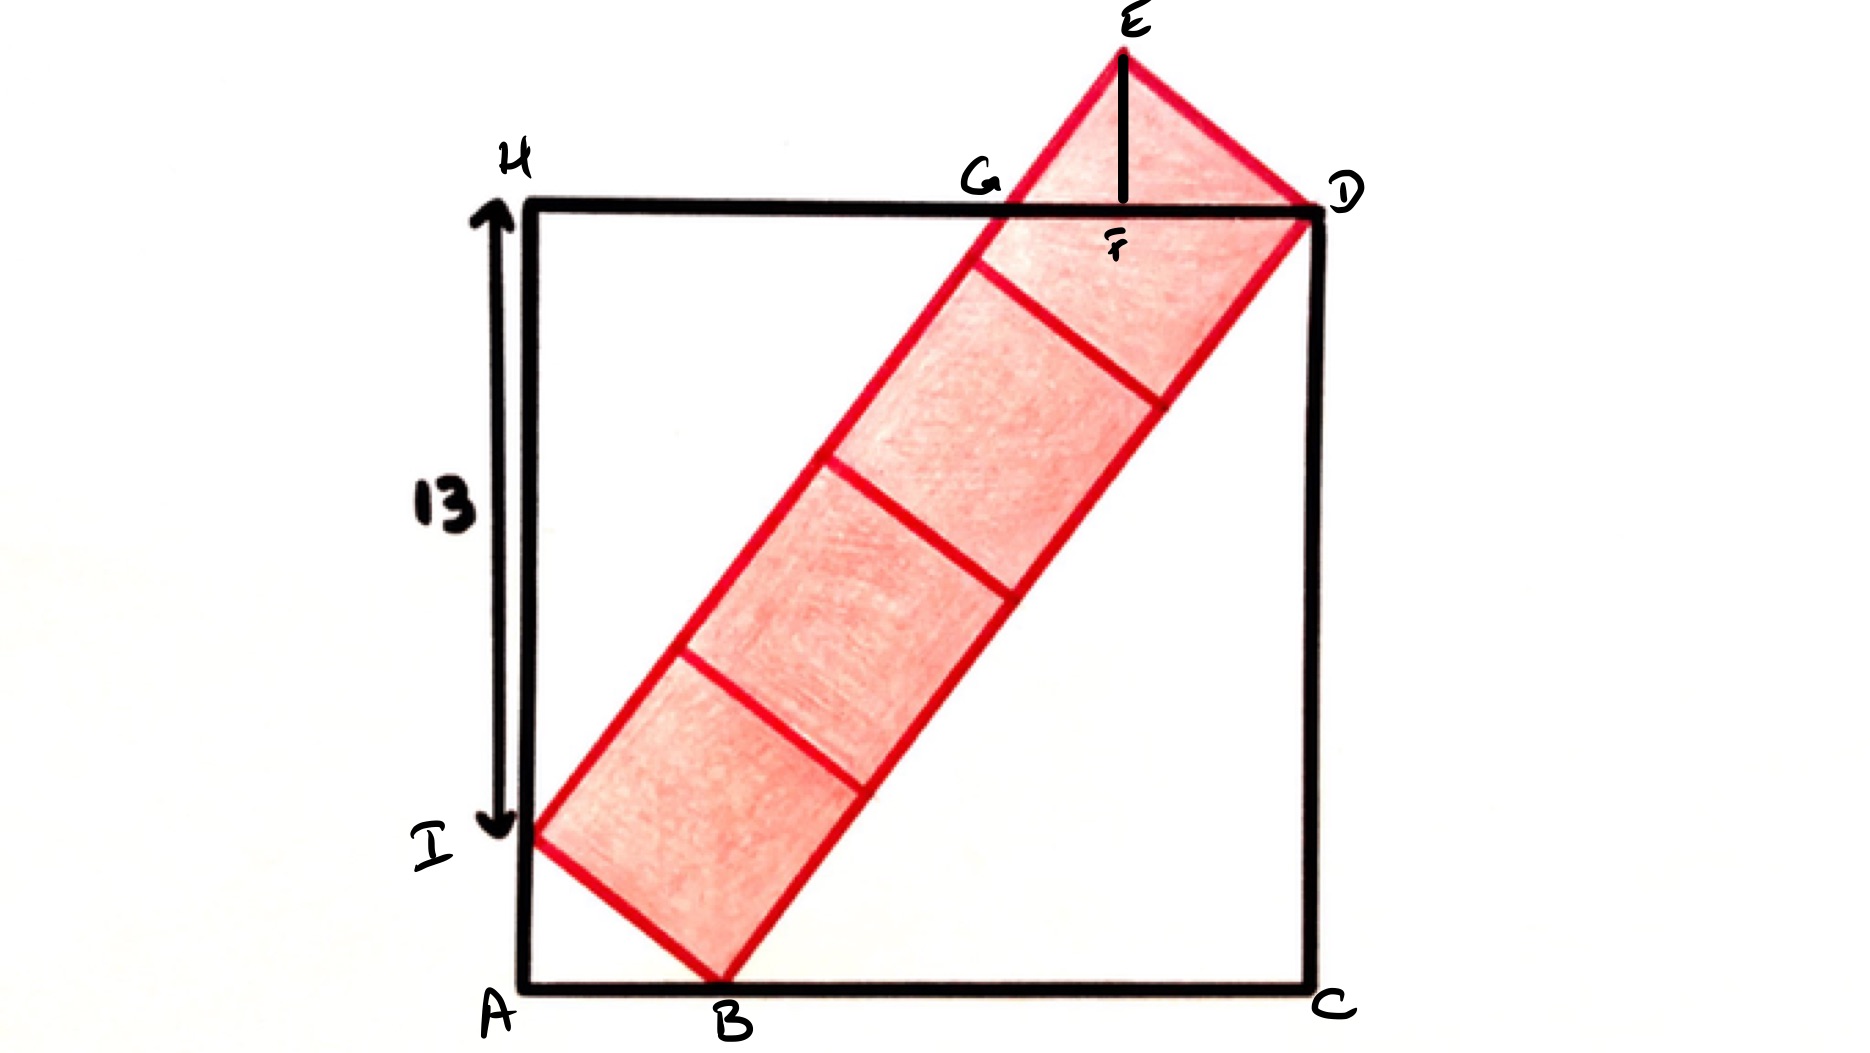 Five squares across a square labelled